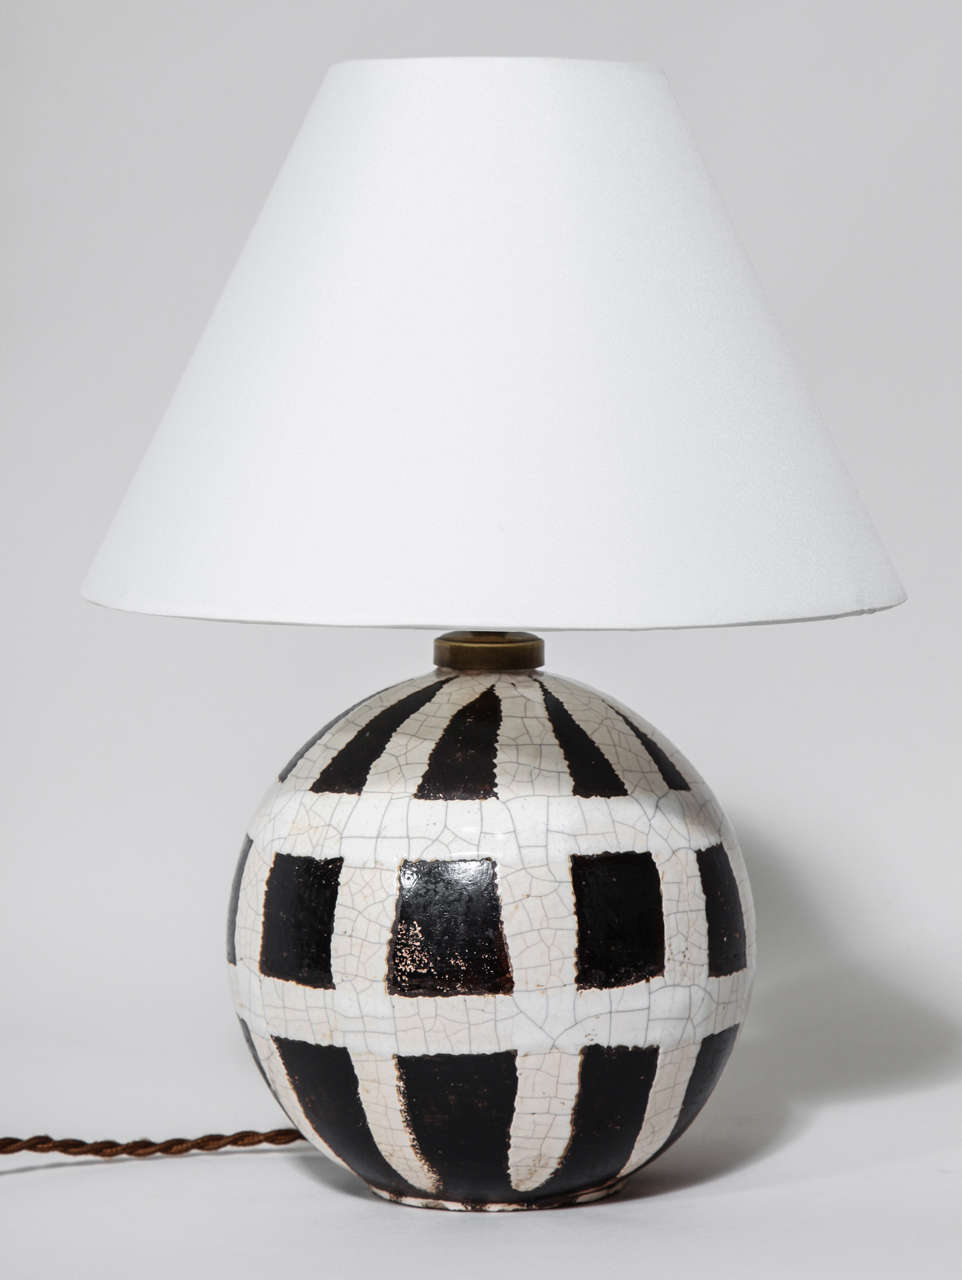 This spherical lamp base has a white and beige fishnet design on a brown ground.
Has been rewired to U.S. standards.
Signed: 